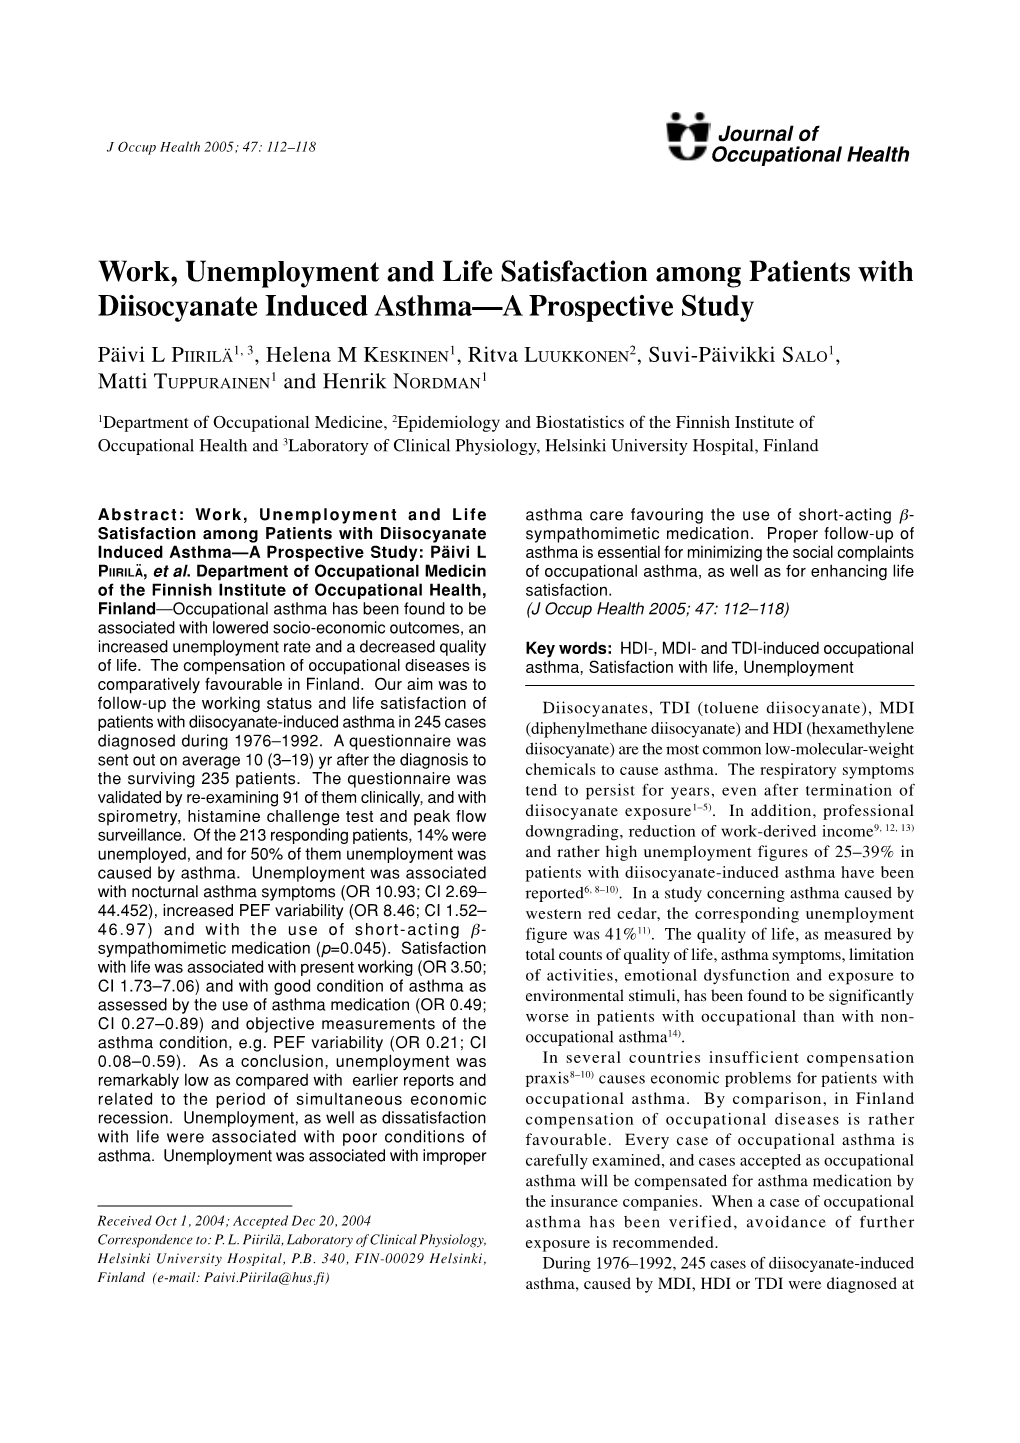 Work, Unemployment and Life Satisfaction Among Patients with Diisocyanate Induced Asthma—A Prospective Study